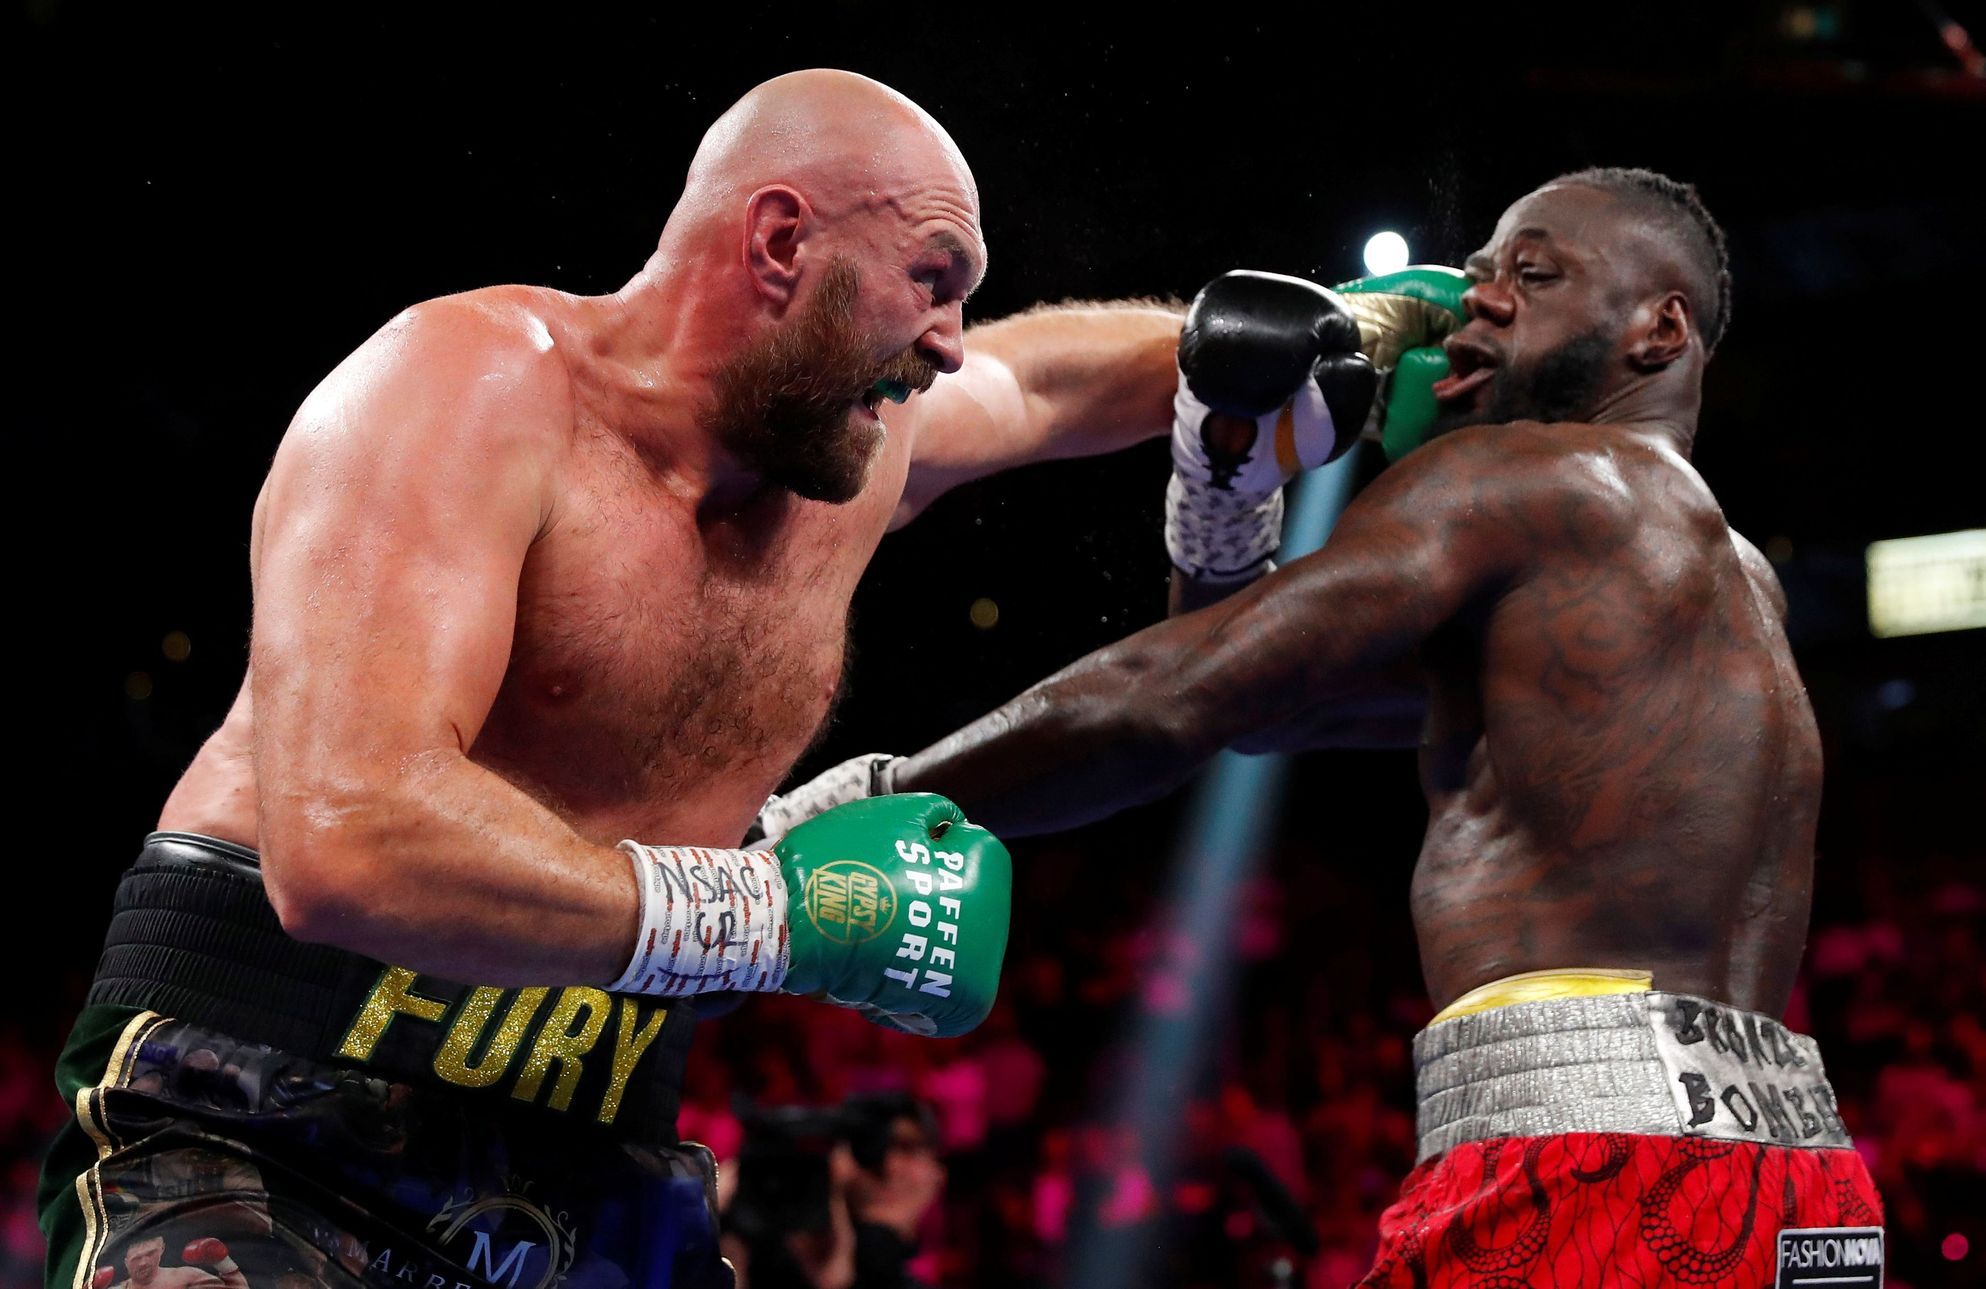 Fury knocked out Wilder and defended the WBC title